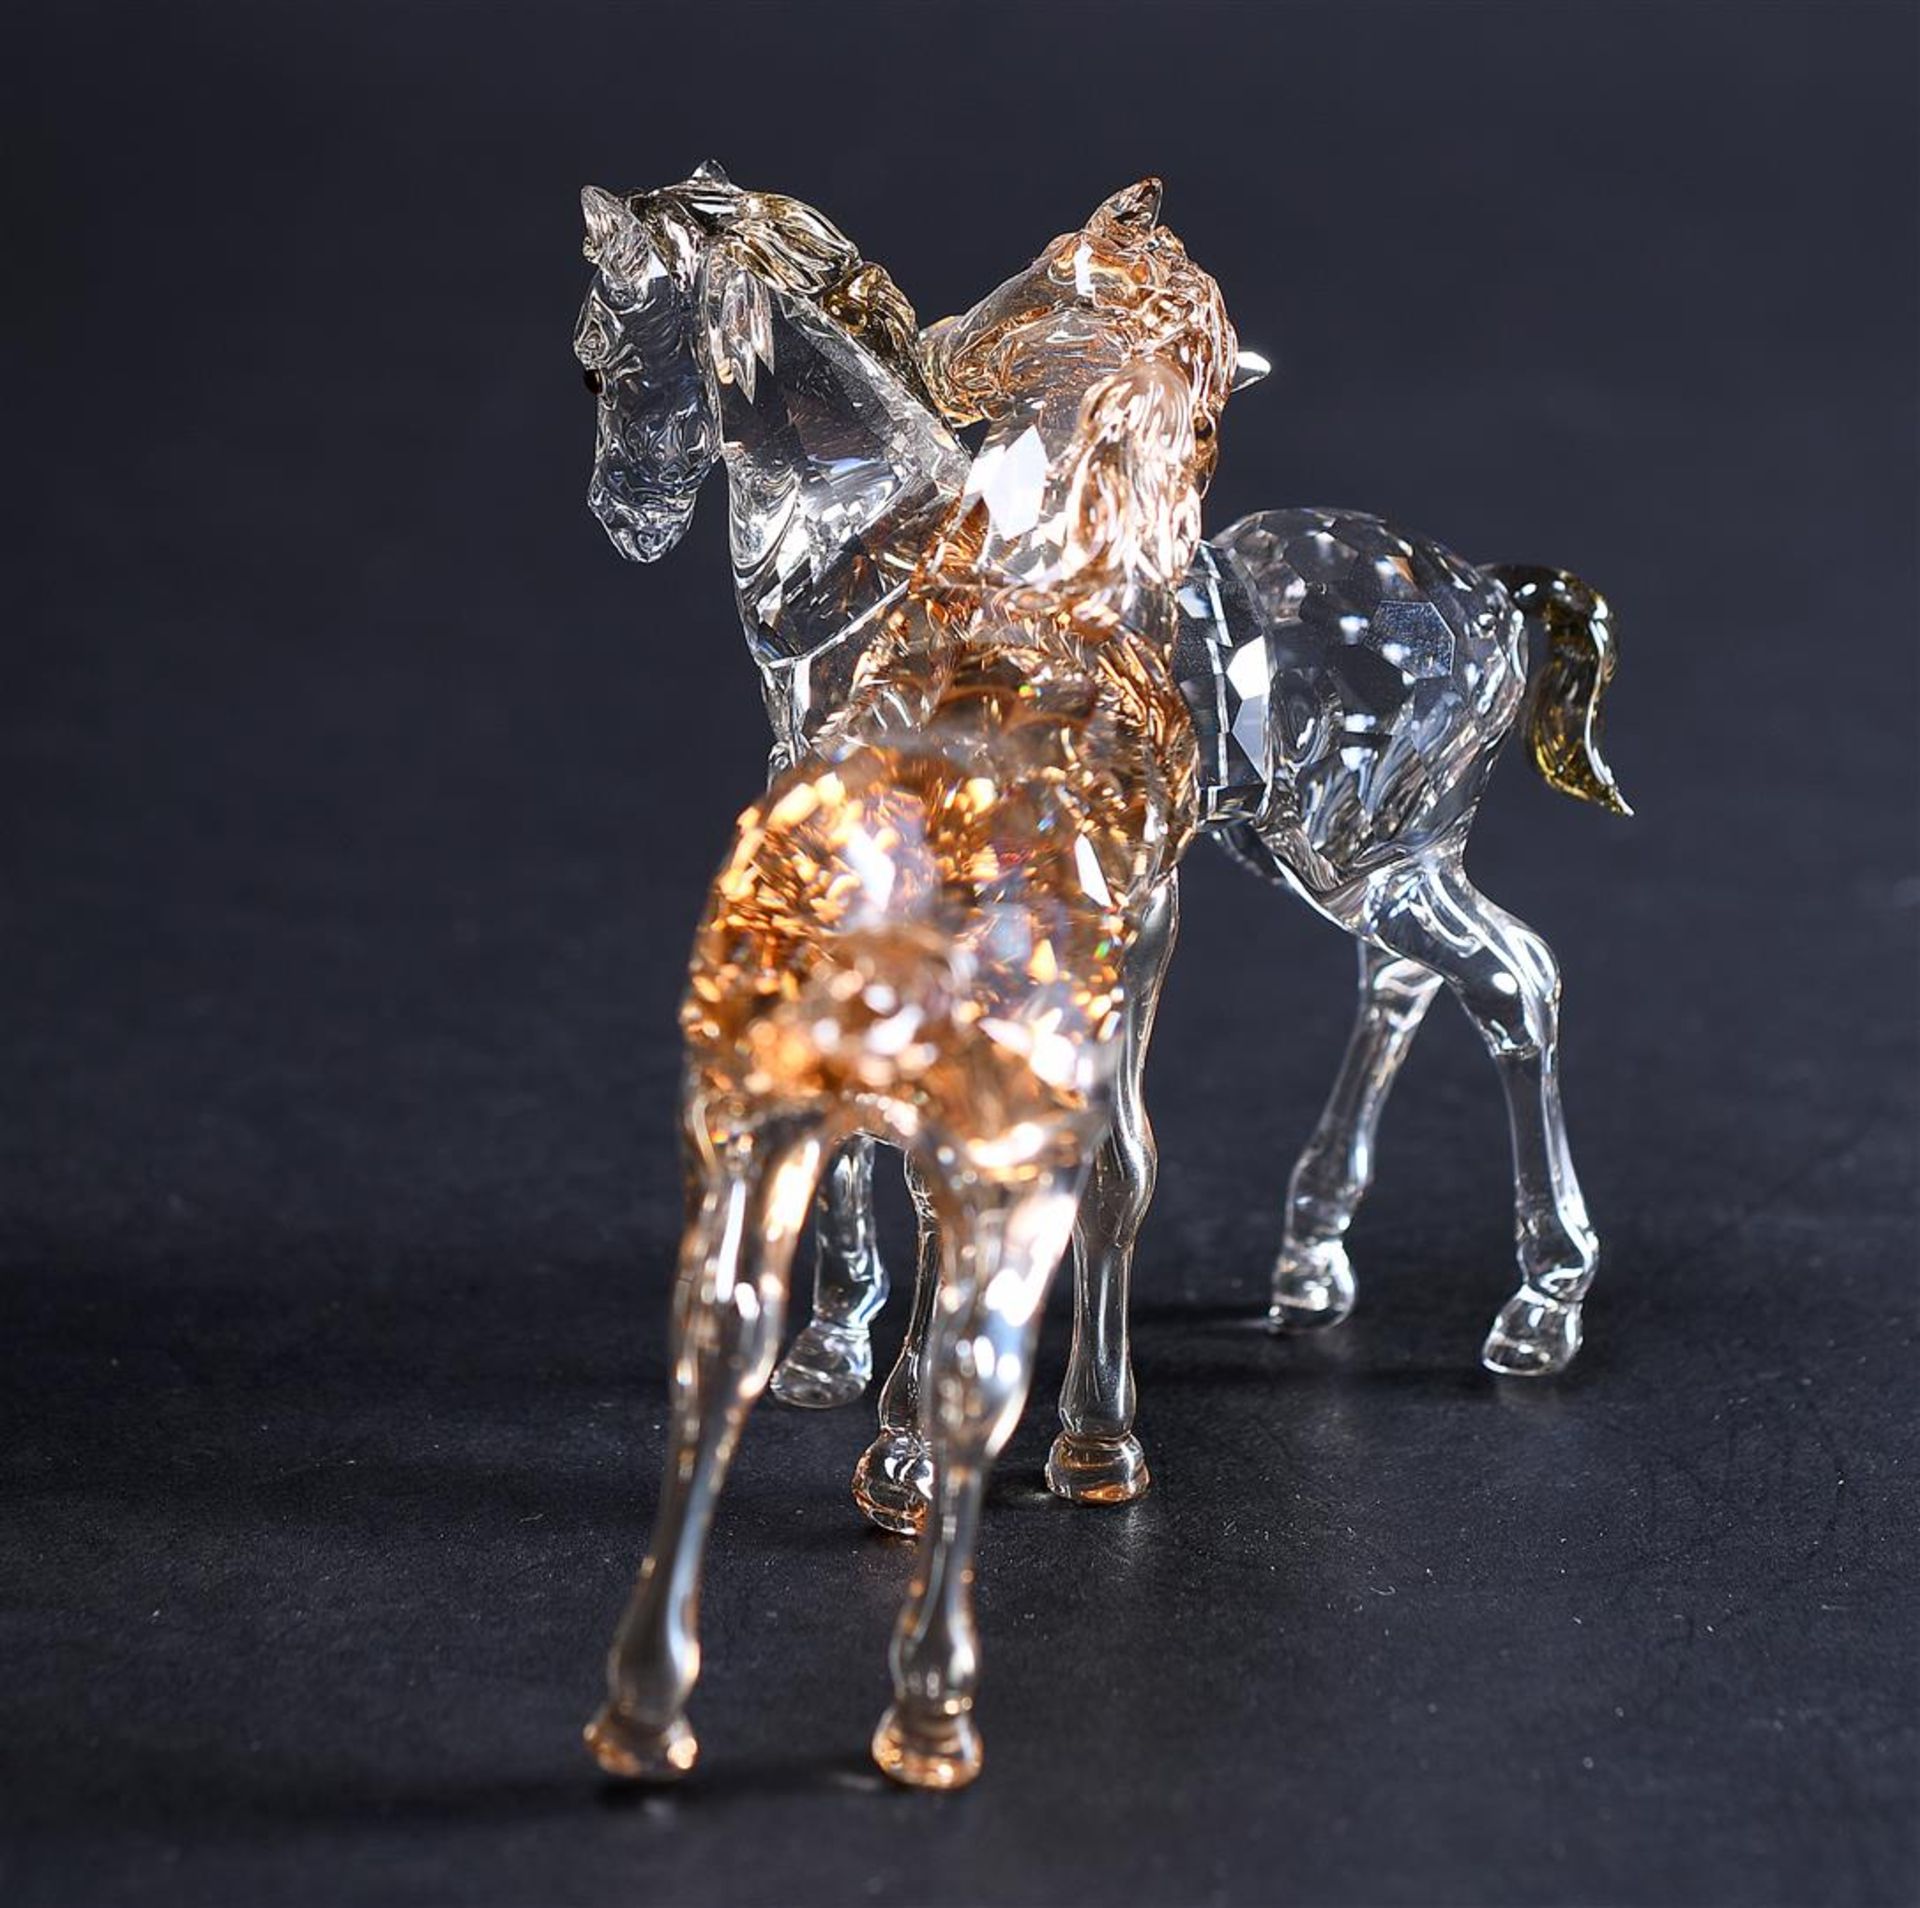 Swarovski, Foals, Year of issue 2012,1121627. Includes original box.
11,9 x 9,2 cm. - Image 5 of 8